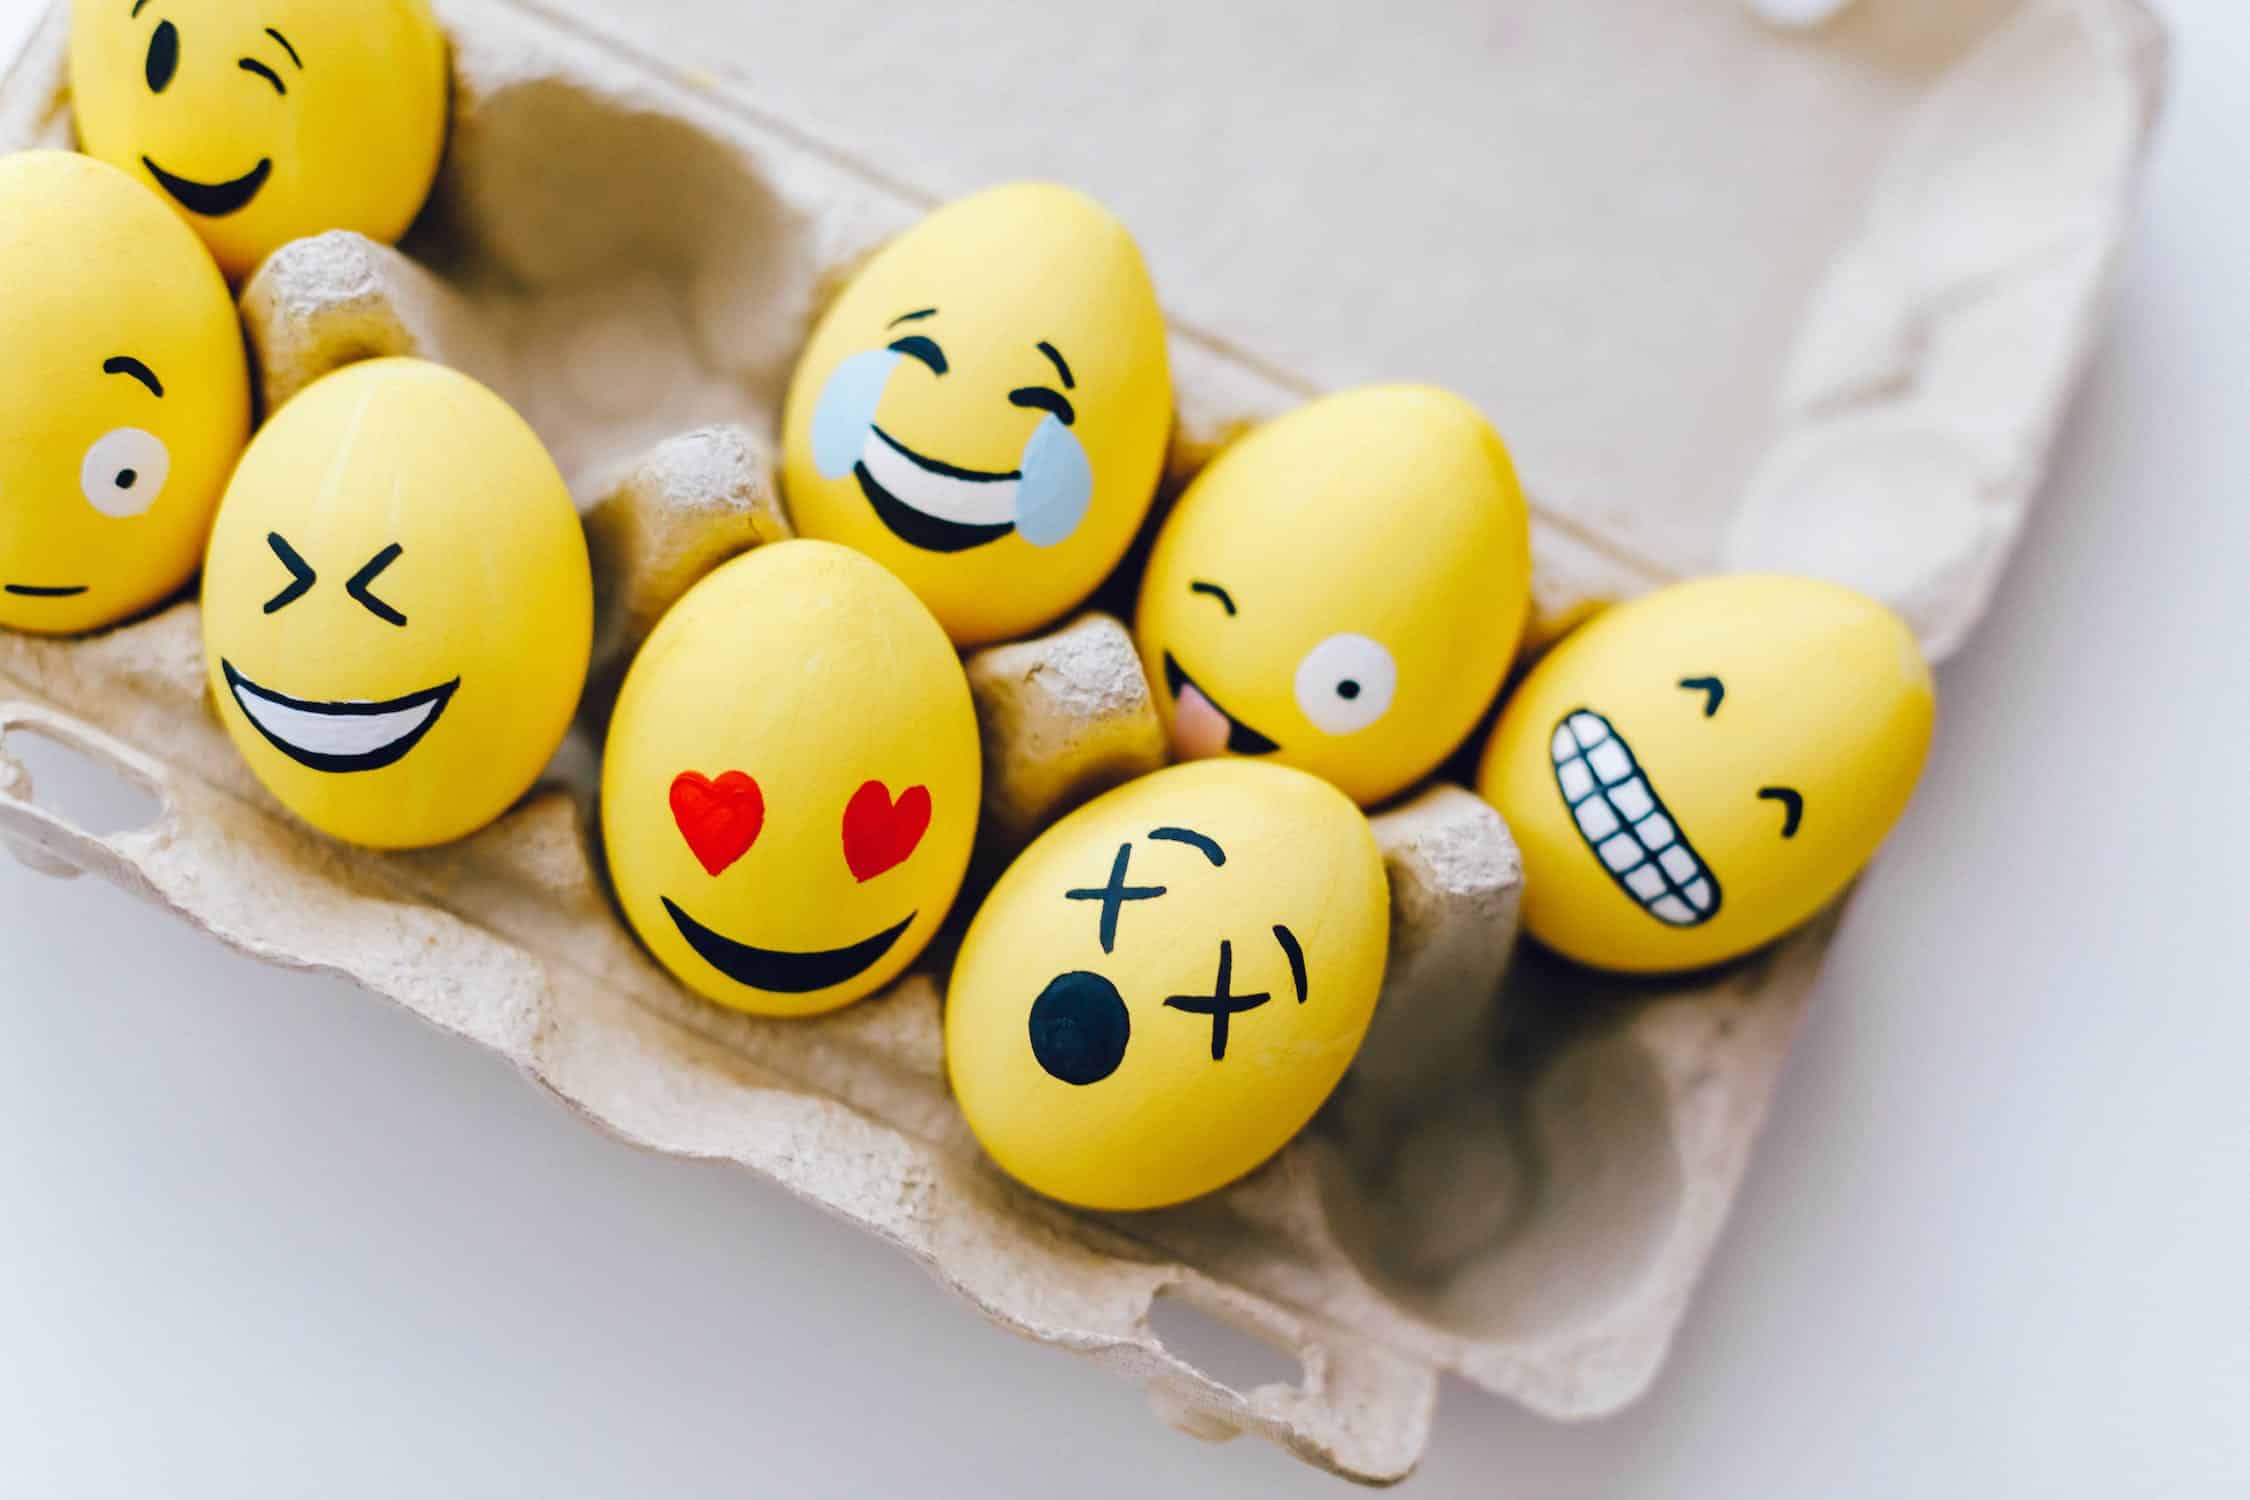 7 yellow eggs with emojis painted on them in carton